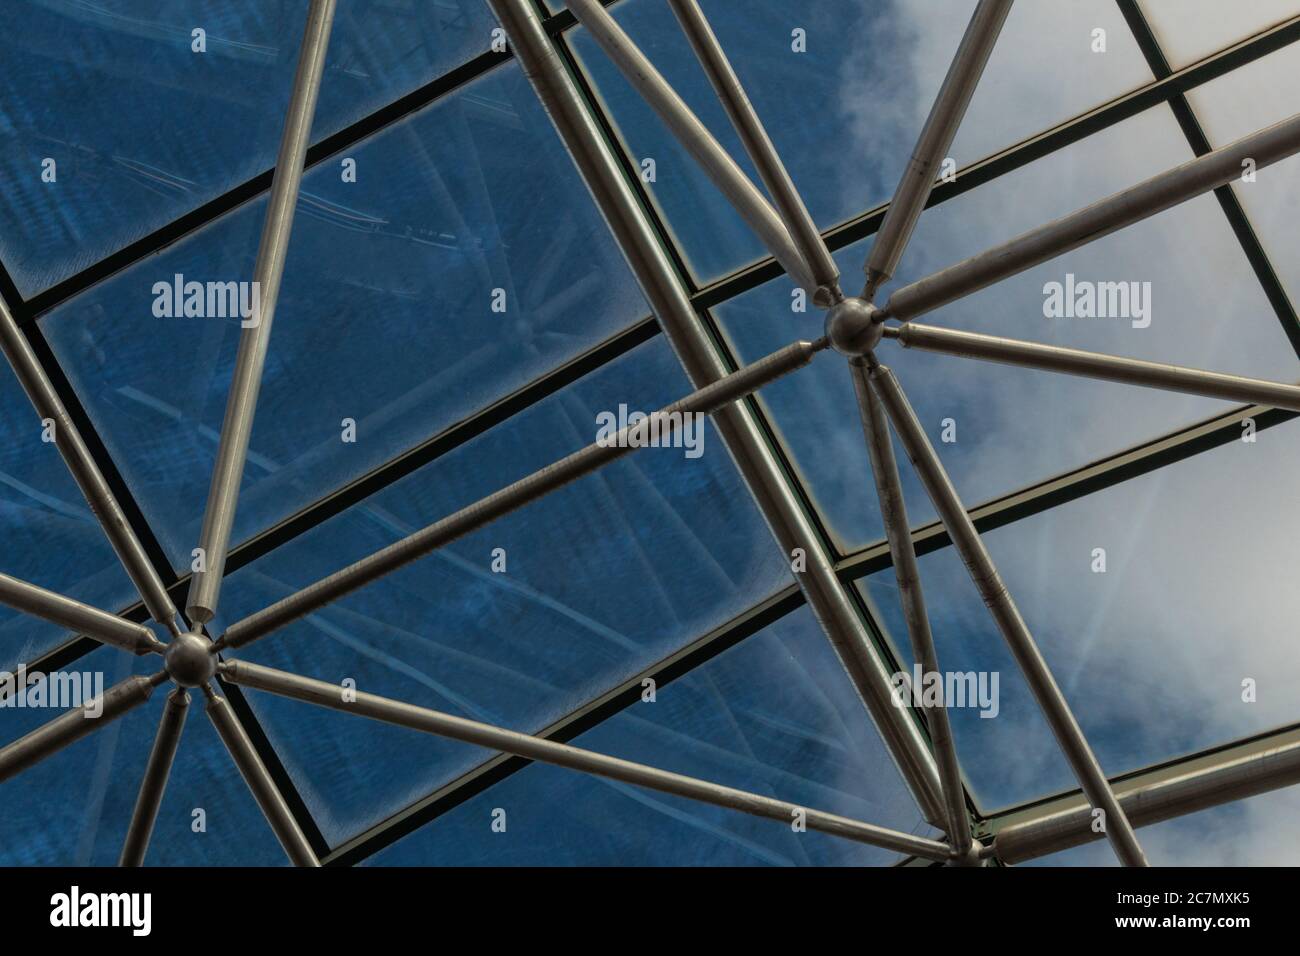 Elaborate steel metal greenhouse structure with diffuse view of deep blue sky with clouds, horizontal aspect Stock Photo